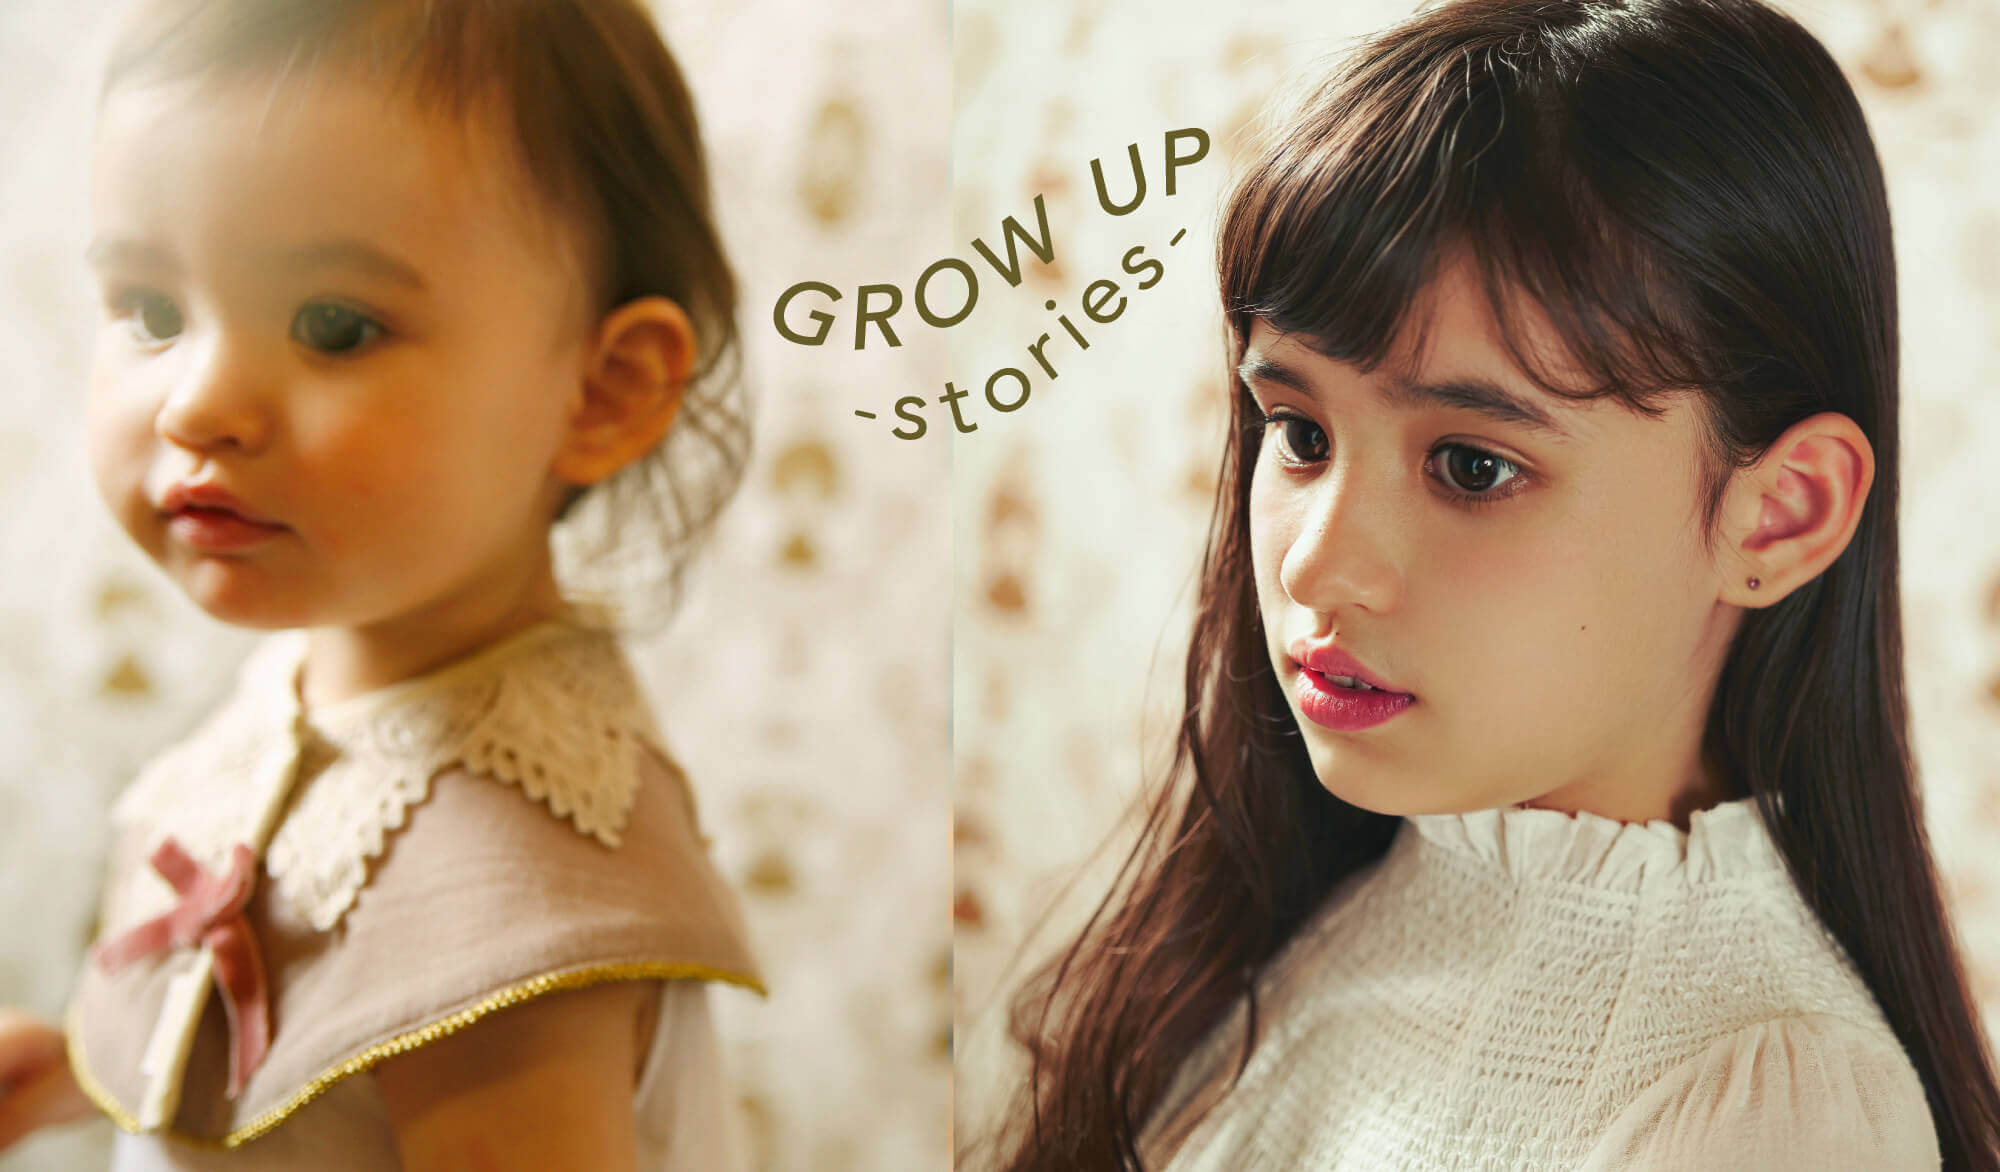 MARLMARL GrowUp stories